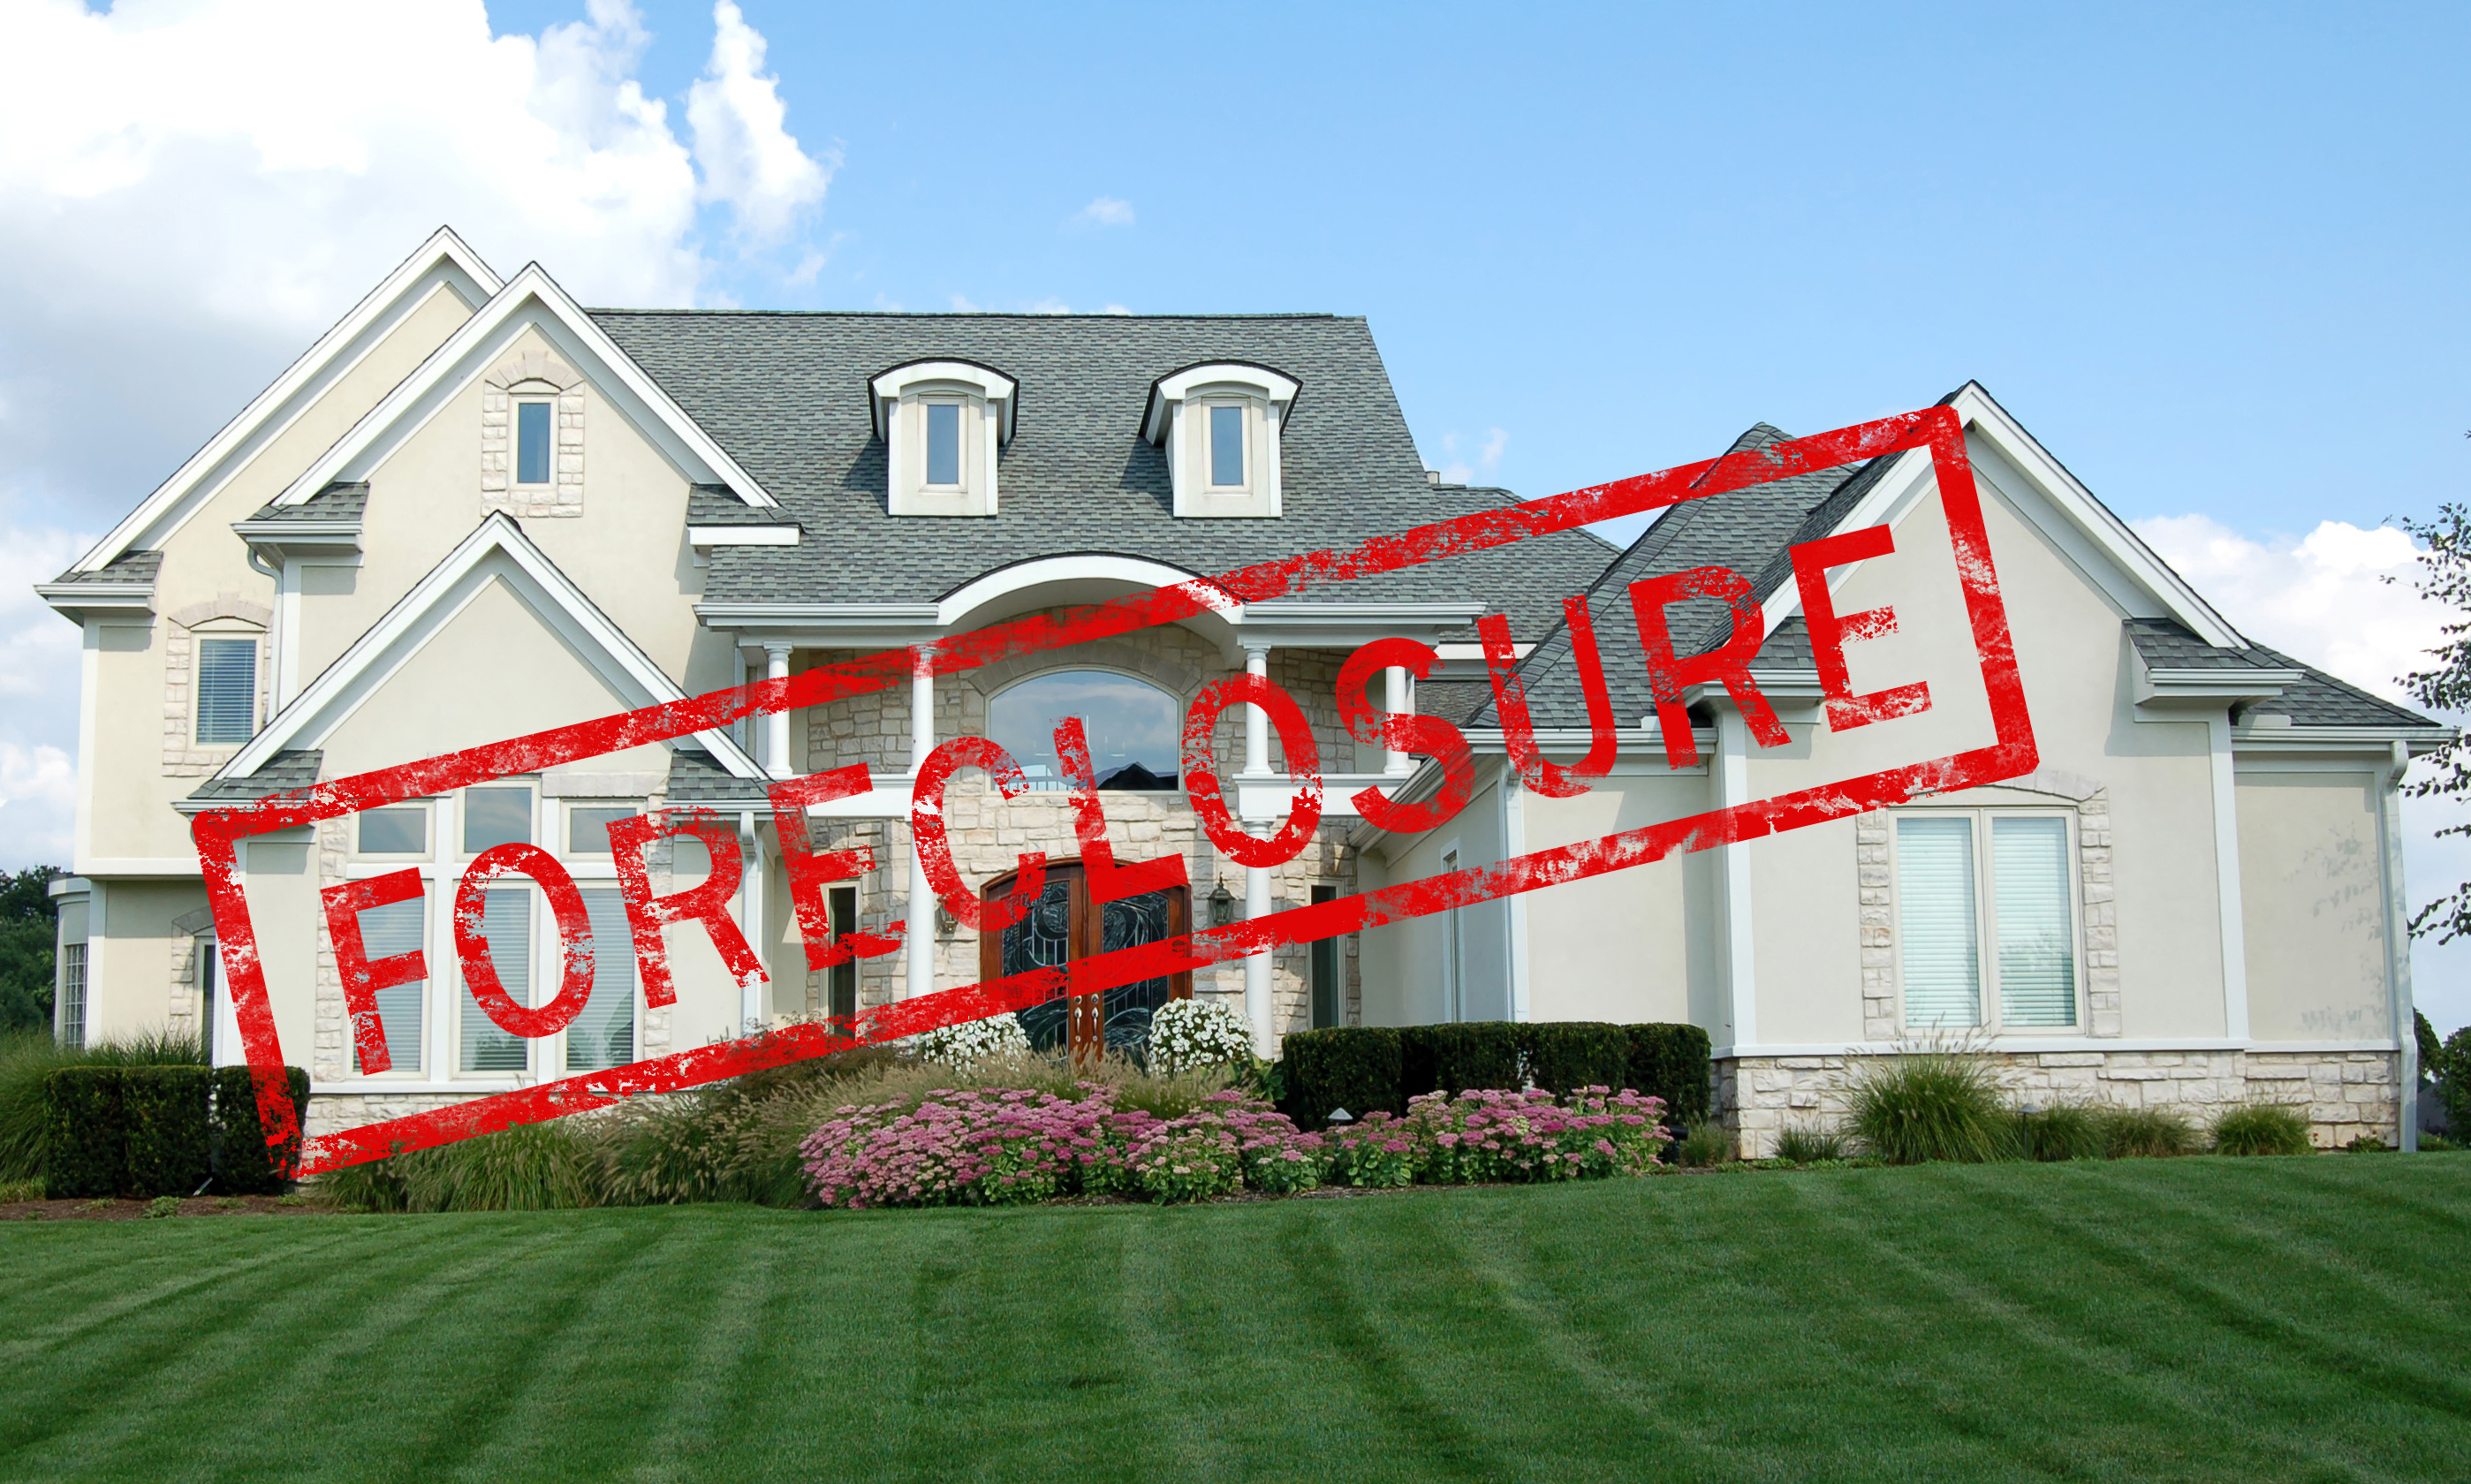 Call Real Property Metrics to discuss valuations regarding Palm Beach foreclosures